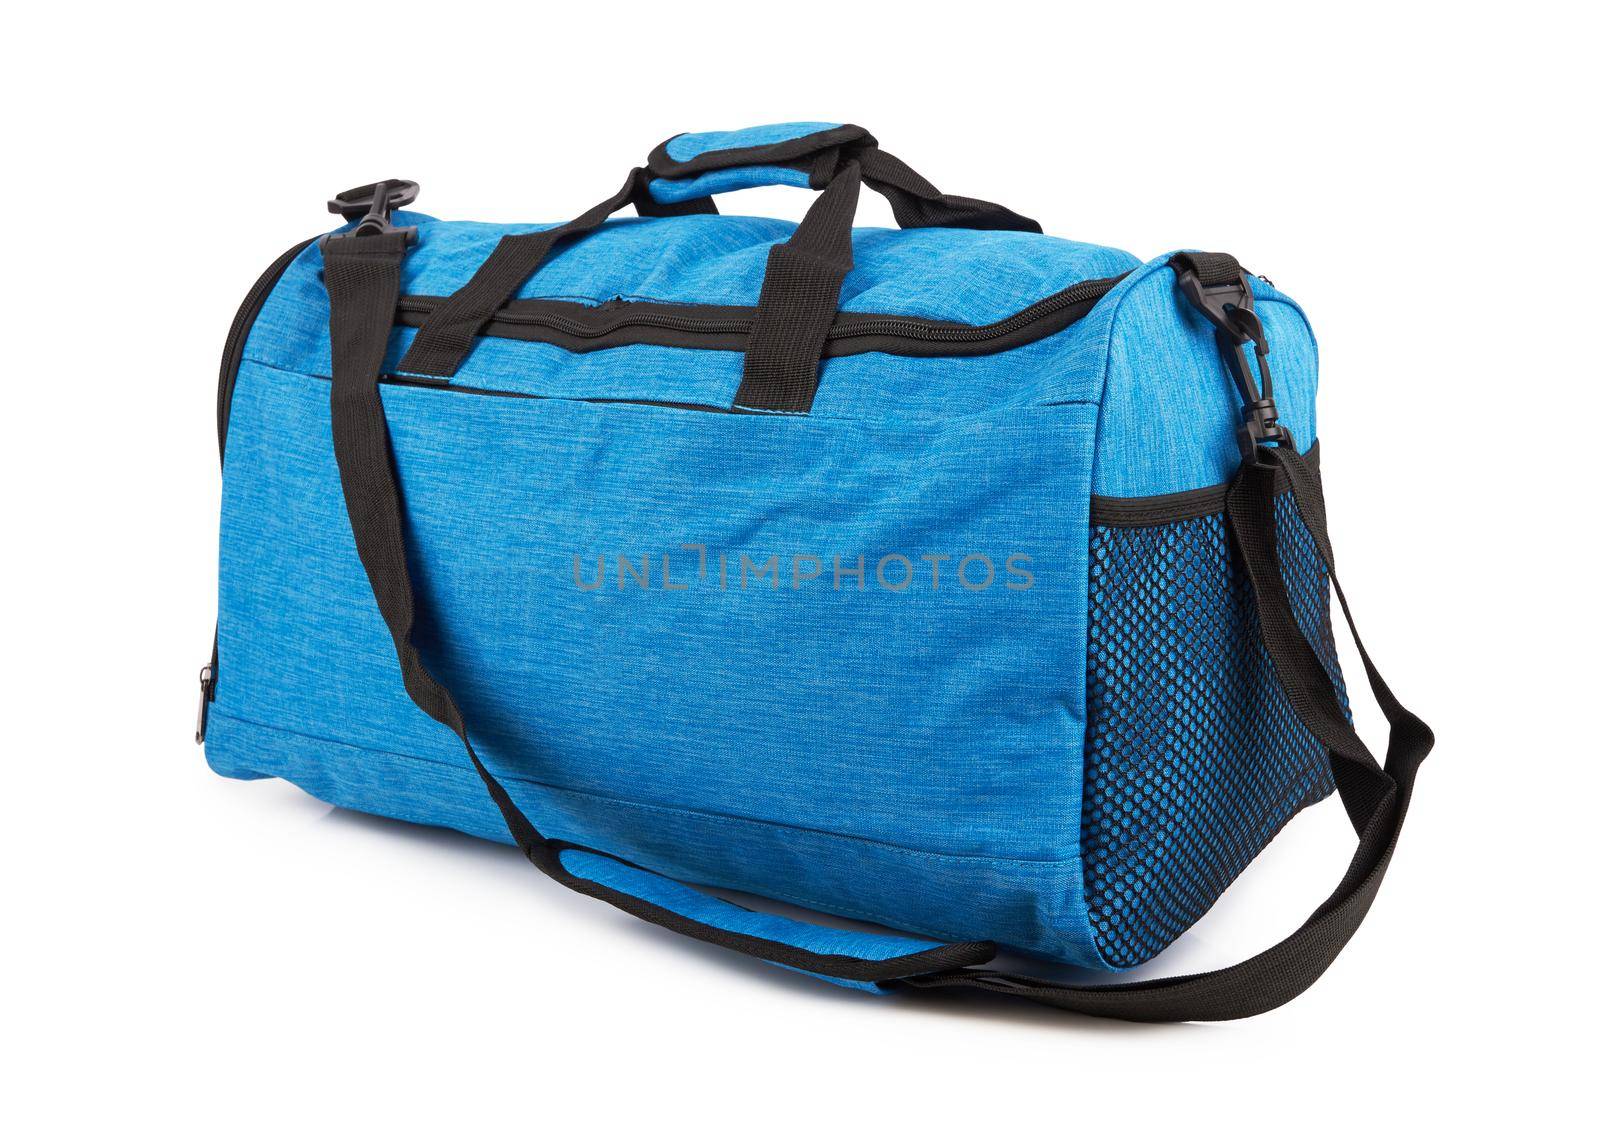 Sport bag isolated on a white background